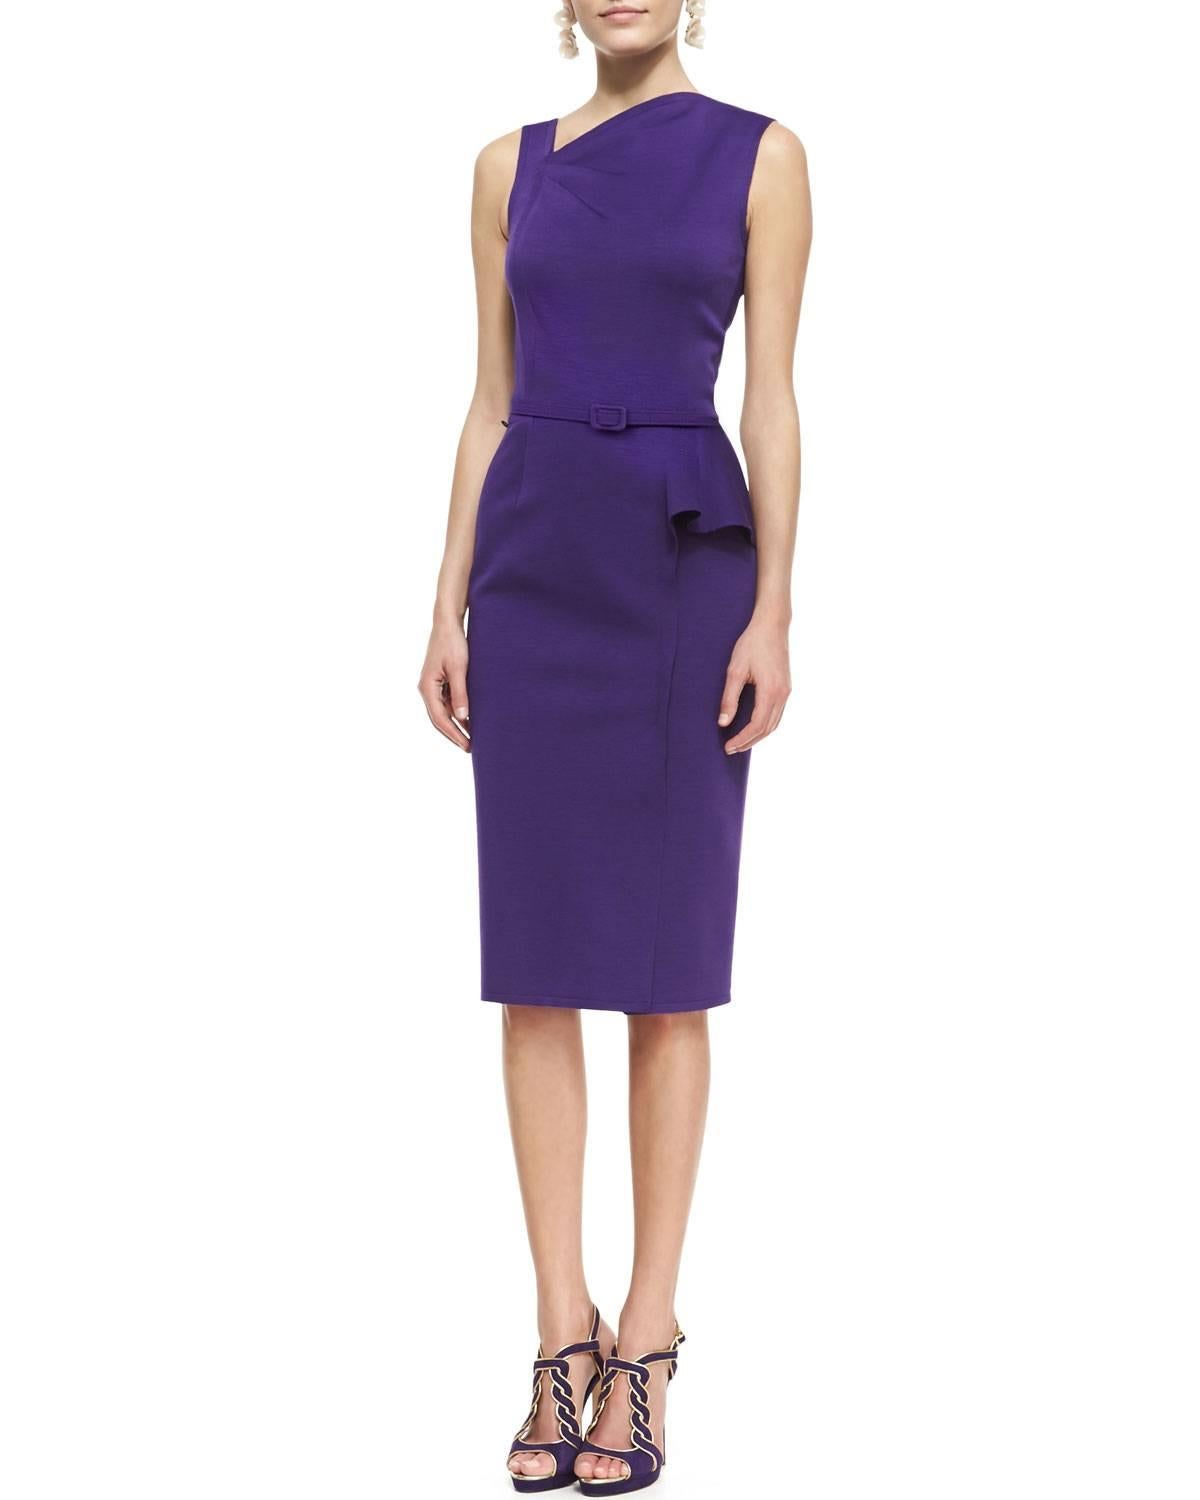 Oscar De La Renta Purple Ruched Sheath Dress Sz 4

Made In: Italy
Color: Purple
Composition: 81% wool, 13% nylon, 6% polyester
Lining: Purple wool
Closure/Opening: Back zip closure
Exterior Pockets: Two hip pockets
Overall Condition: Excellent